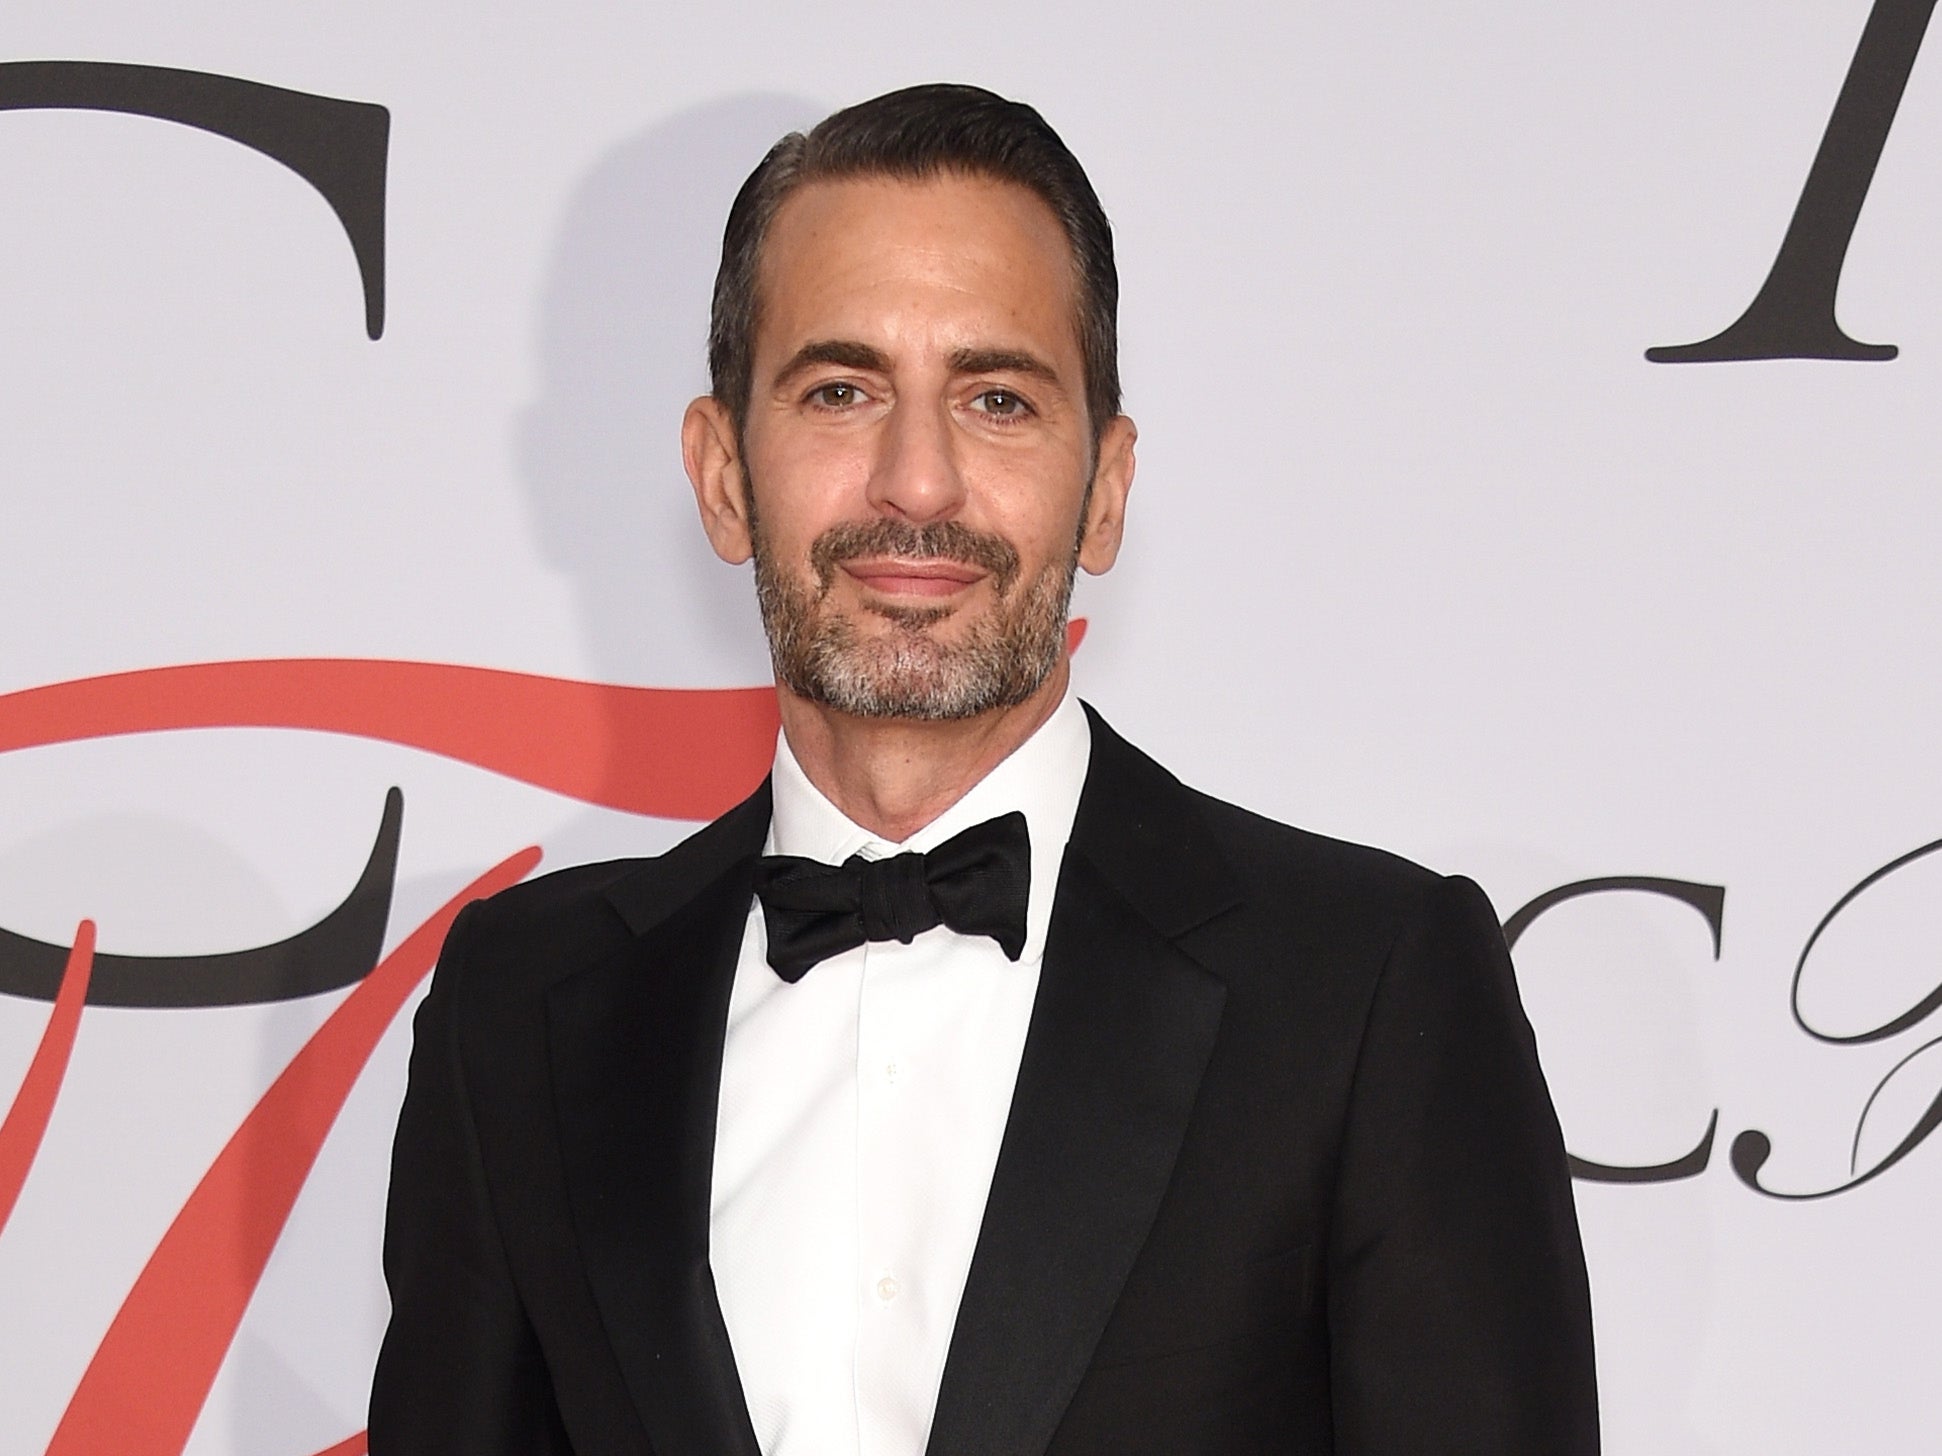 Marc Jacobs at the 2015 CFDA Fashion Awards